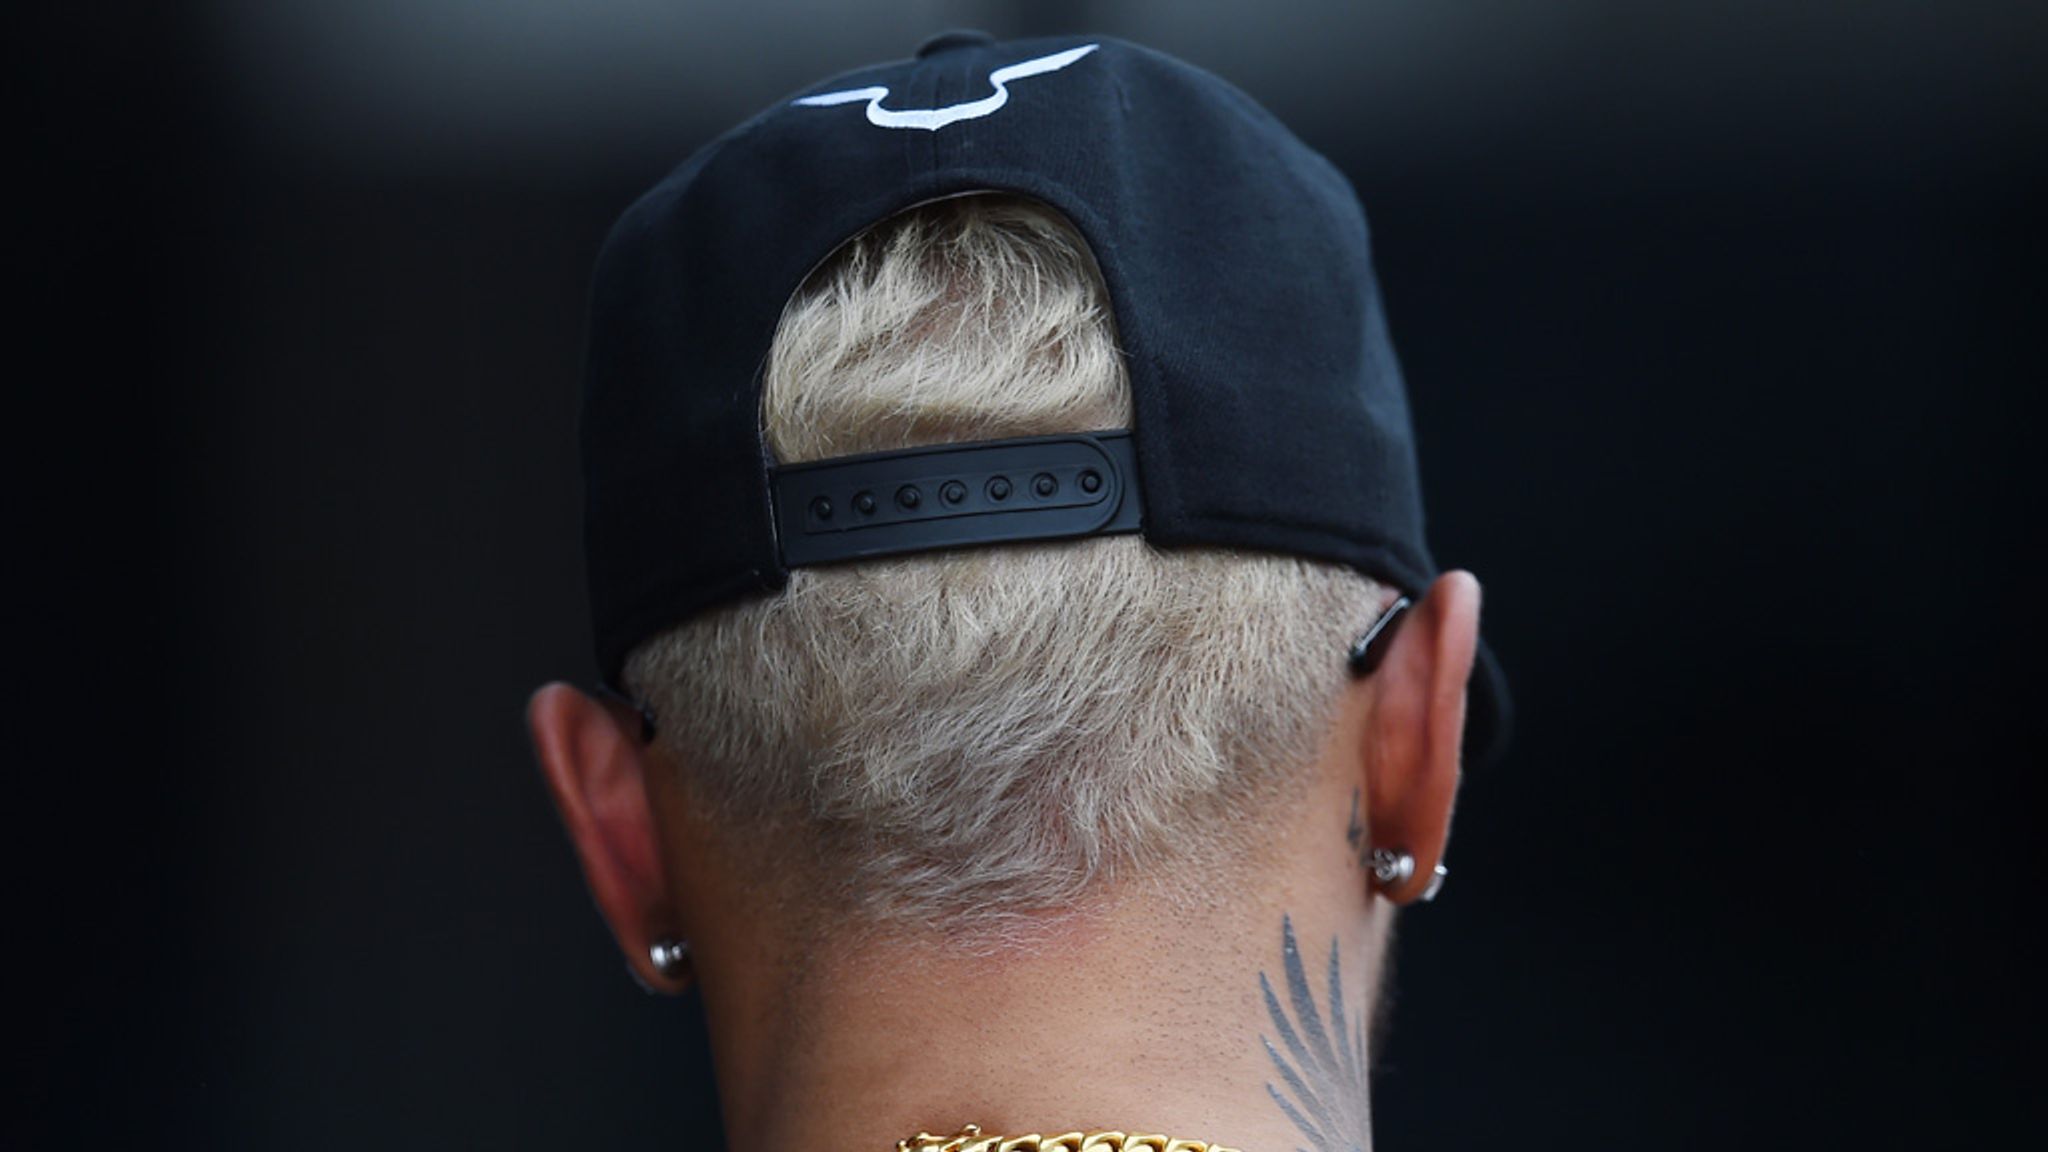 Lewis Hamilton reveals new blond look for the Italian GP | F1 News